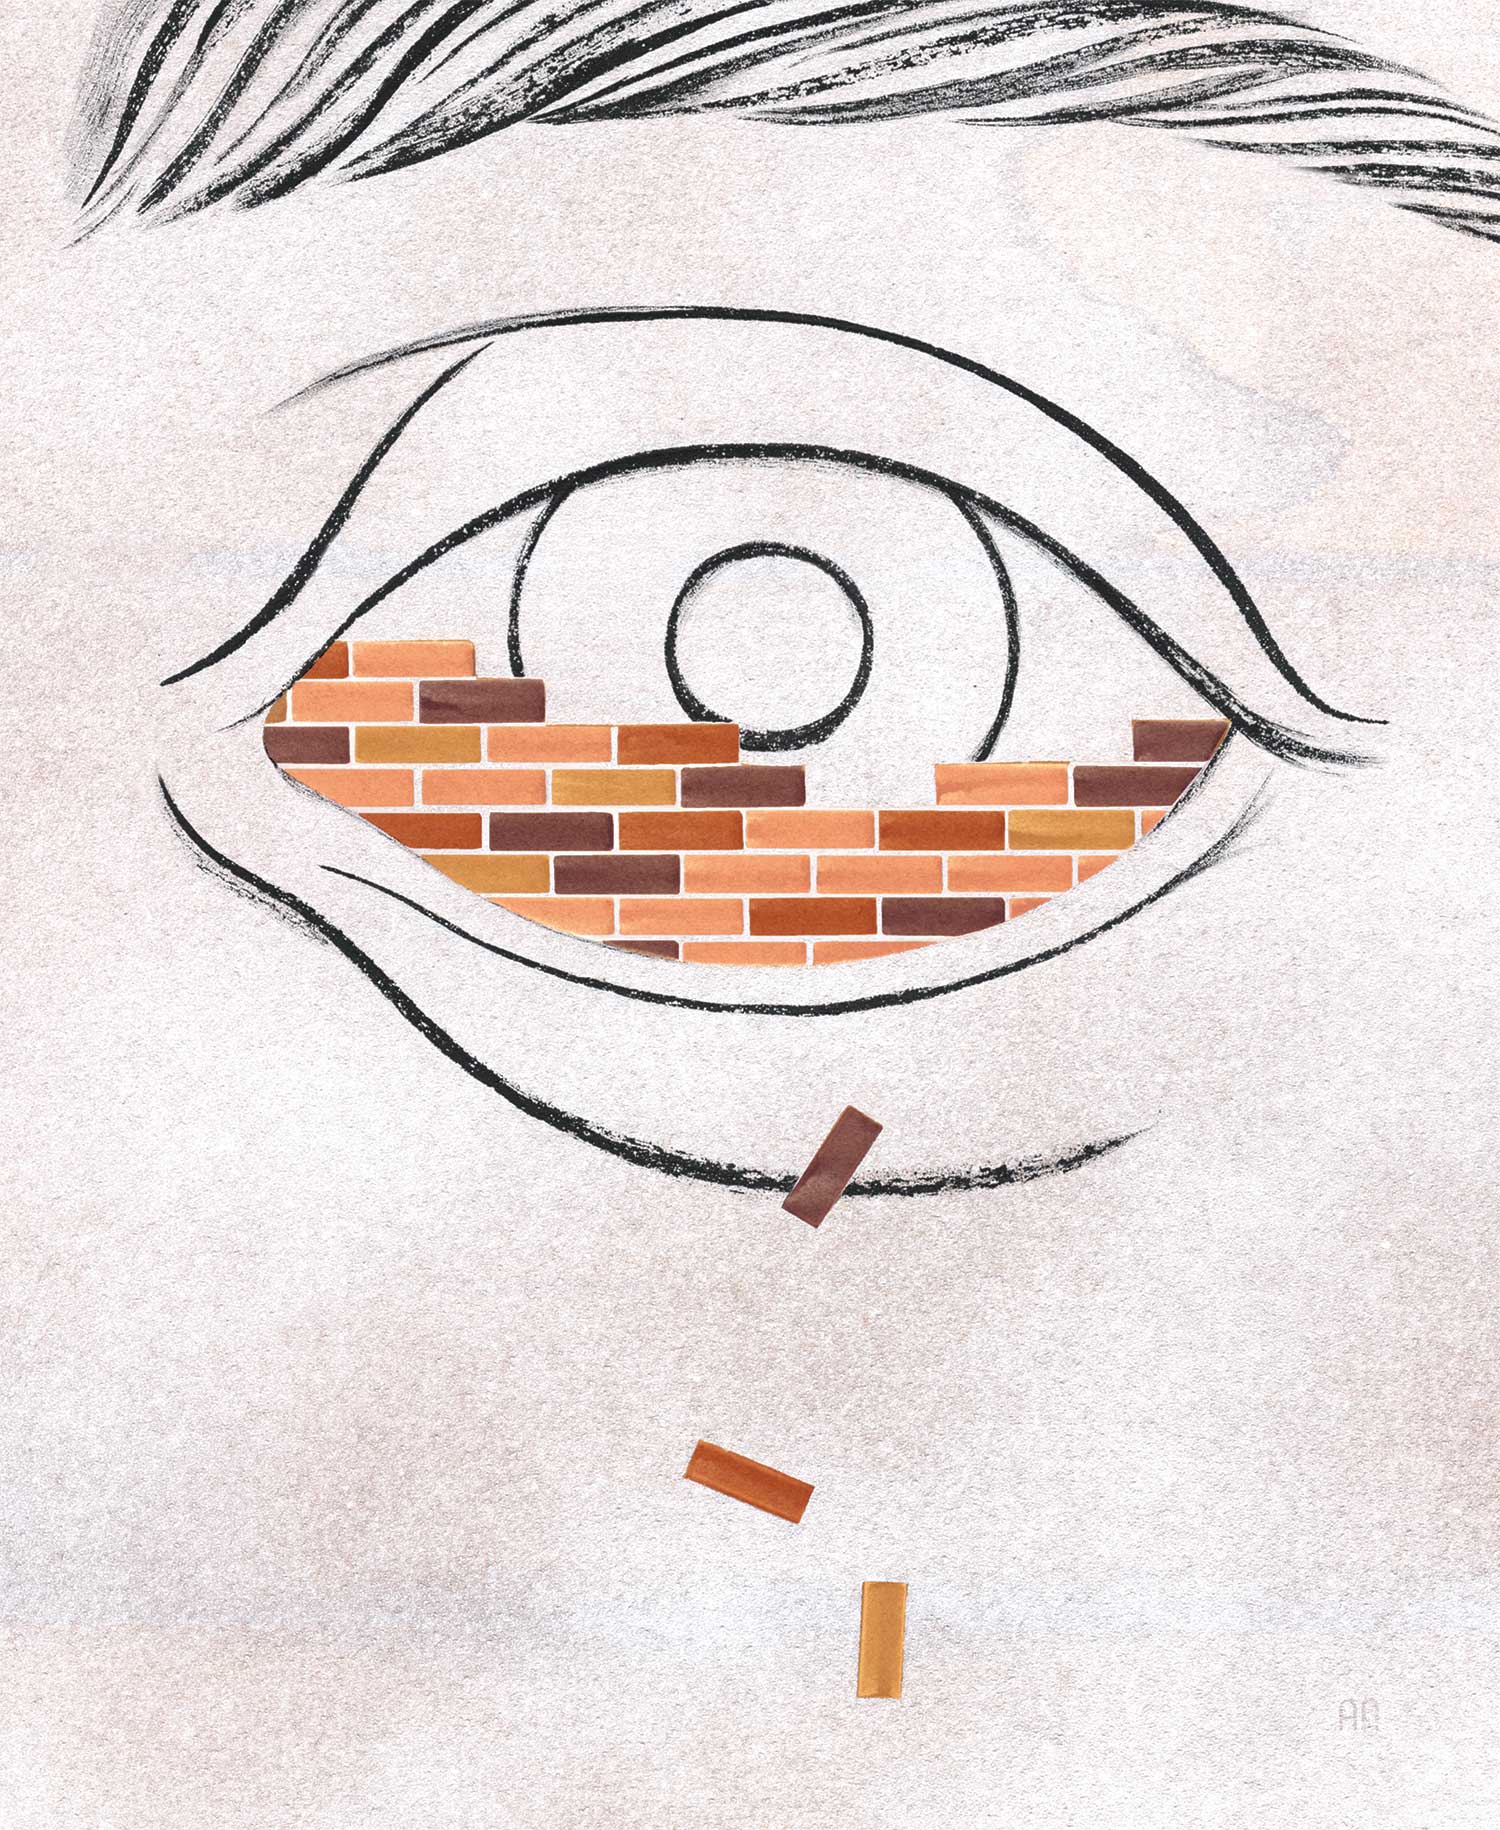 Illustration of an eye being blocked by a brick wall